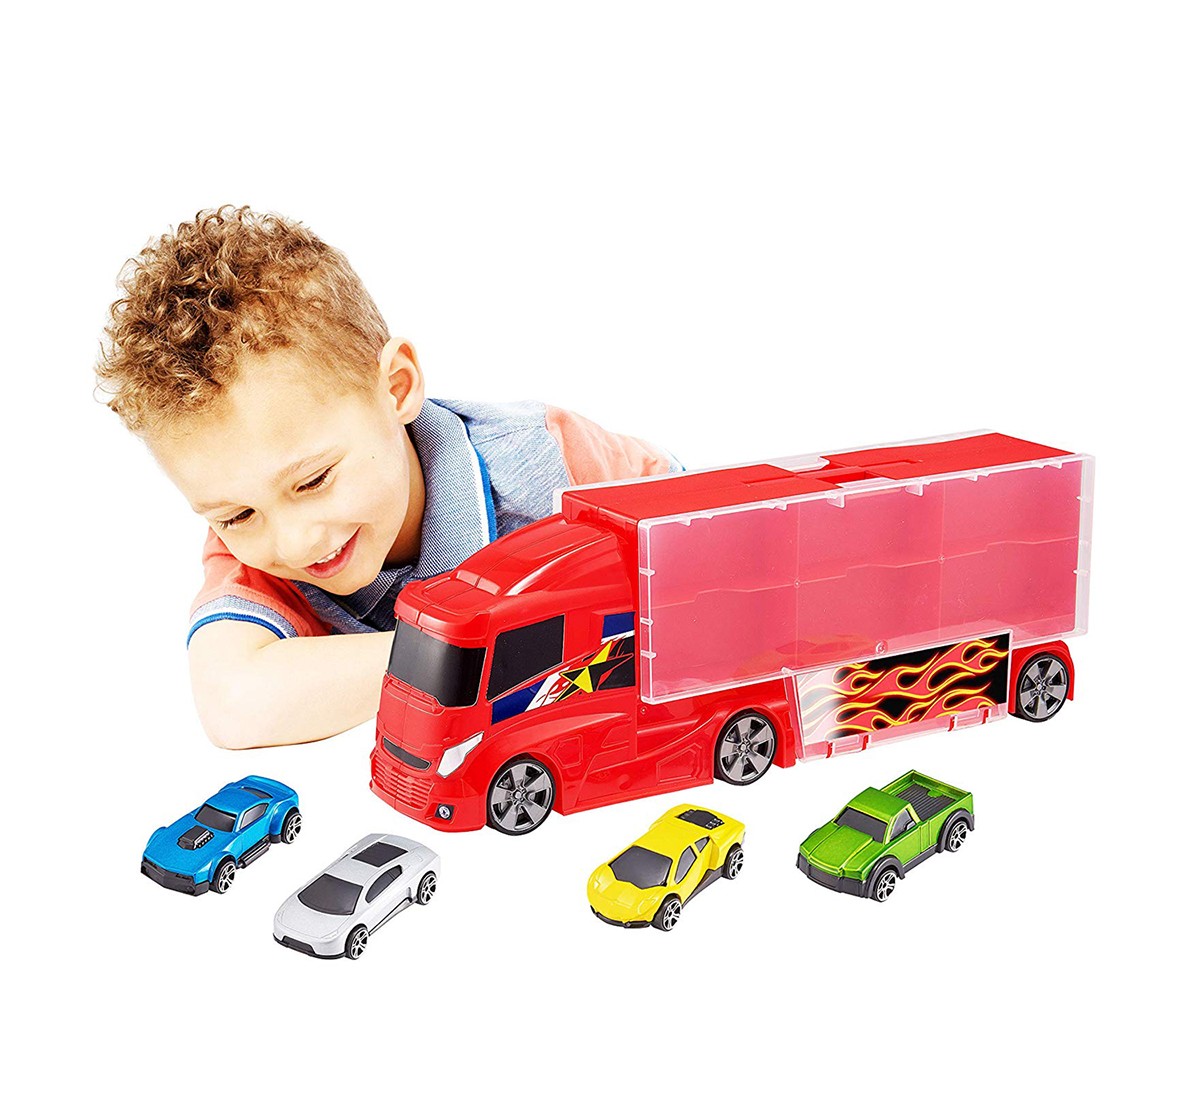 Teamsterz Truck Carry Case-4 Cars Tracksets & Train Sets for Kids age 3Y+ 